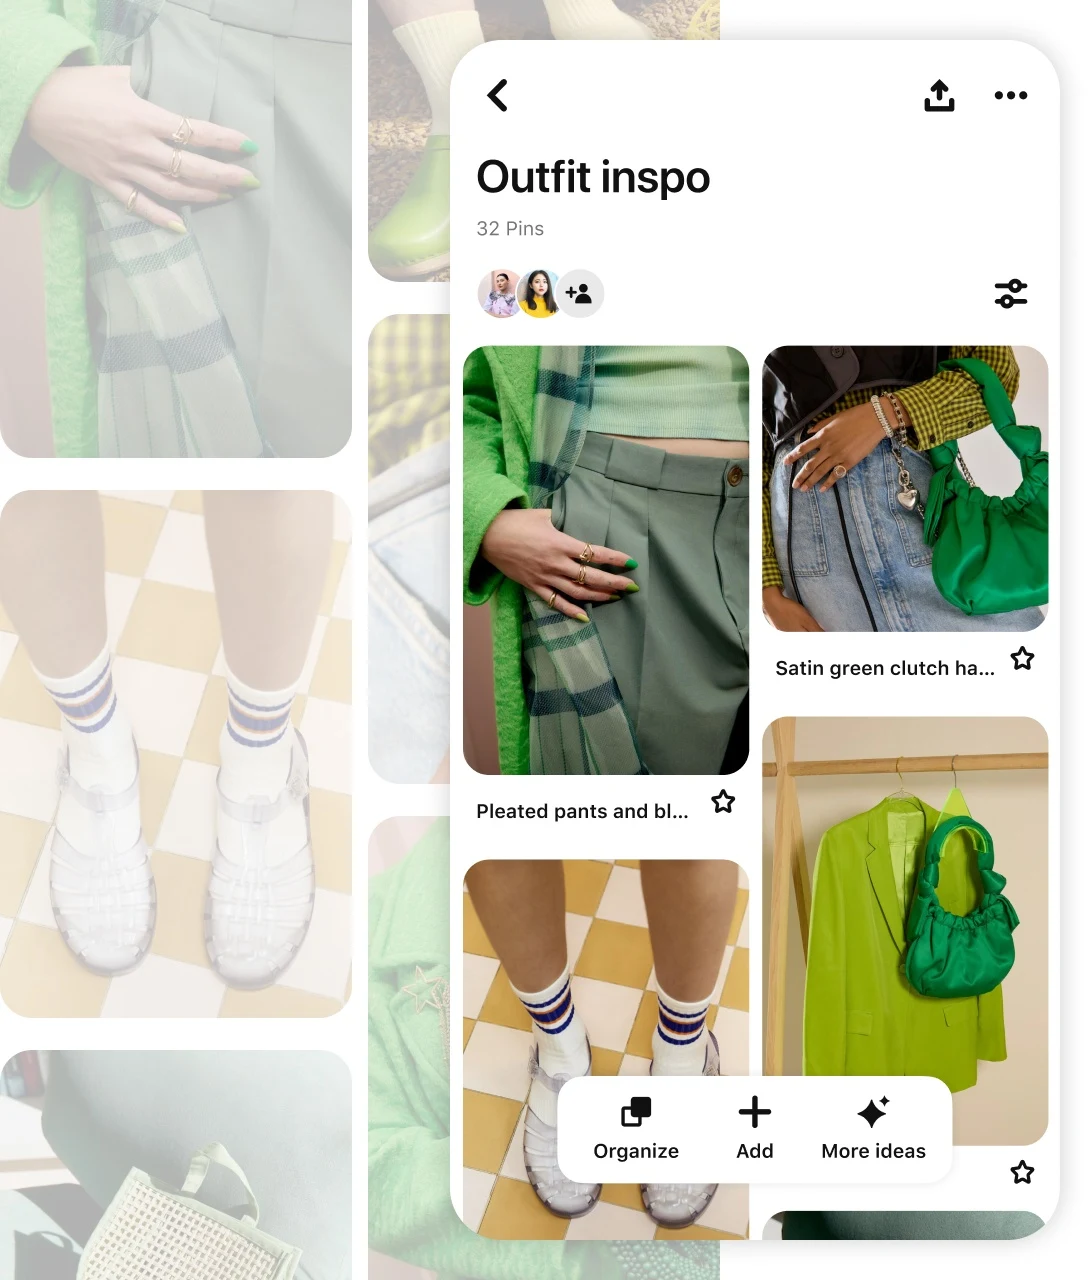 Pins including various green clothing items on a board labeled "Outfit inspo"